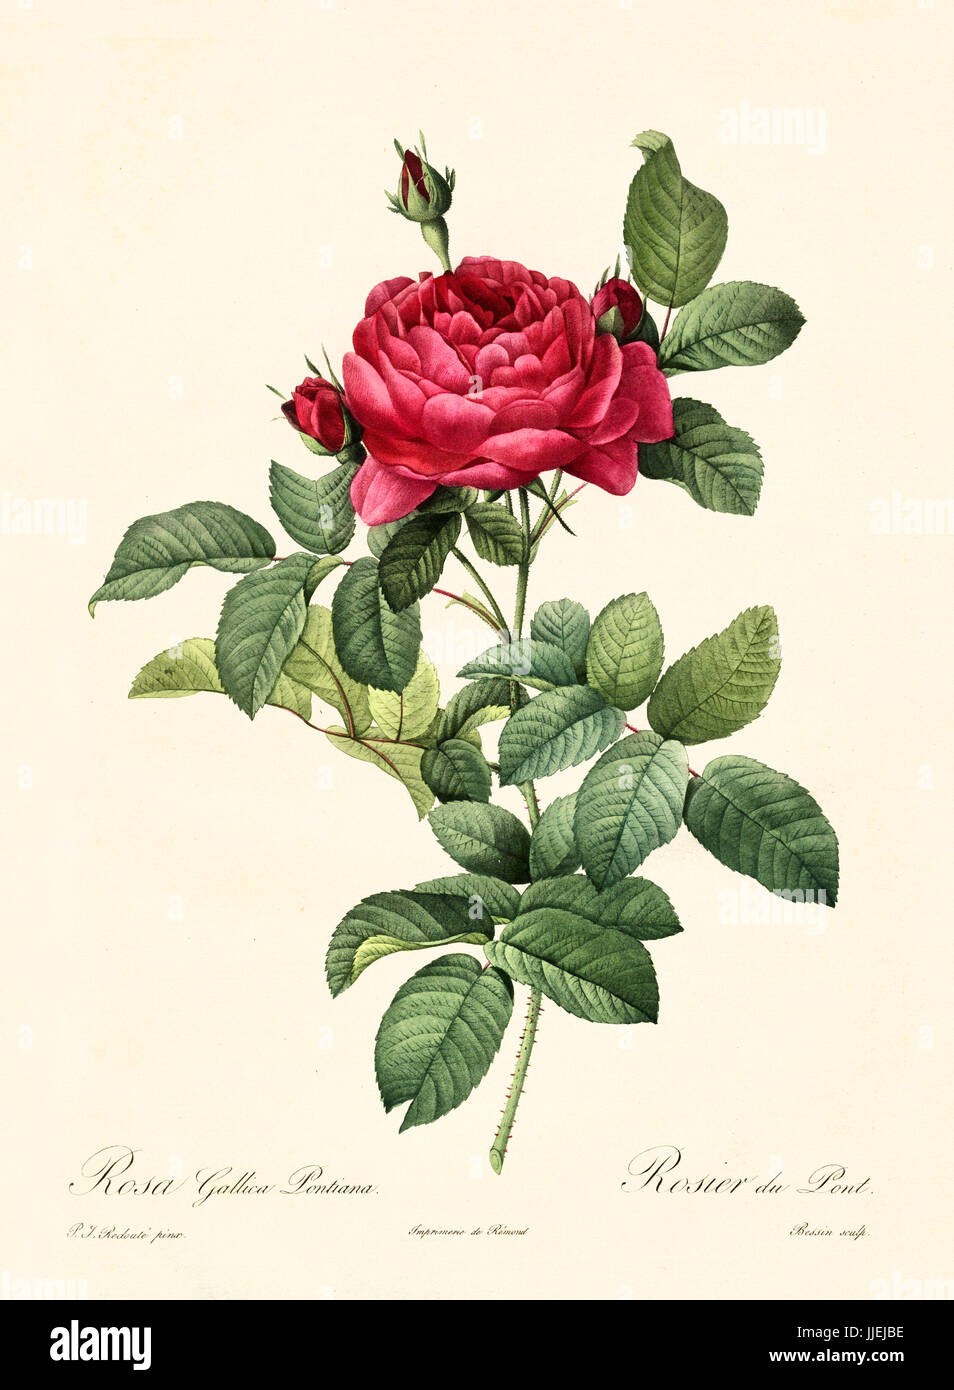 Old illustration of Rosa gallica pontiana. Created by P. R. Redoute, published on Les Roses, Imp. Firmin Didot, Paris, 1817-24 Stock Photo